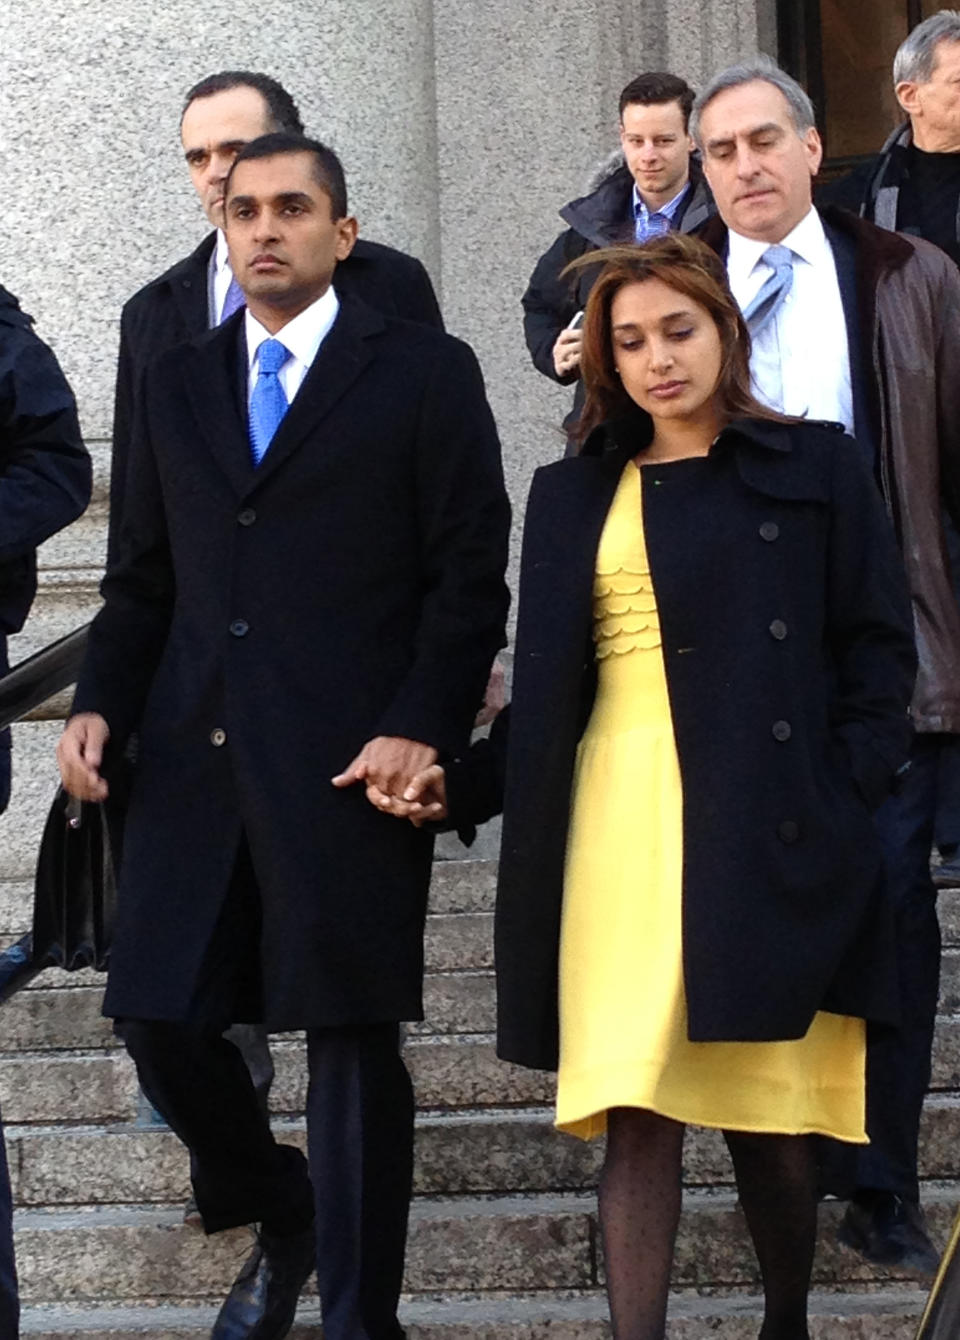 Mathew Martoma, left, leaves federal court in New York City with his wife, Rosemary, Thursday, Feb. 6, 2014, after being convicted of helping his company earn more than a quarter billion dollars illegally through trades based on secrets about the testing of a potential breakthrough Alzheimer's drug. The verdict capped a three-week trial that featured testimony from two prominent doctors who confessed spilling secrets to Mathew Martoma during lucrative consultations with financiers. (AP Photo/Larry Neumeister)